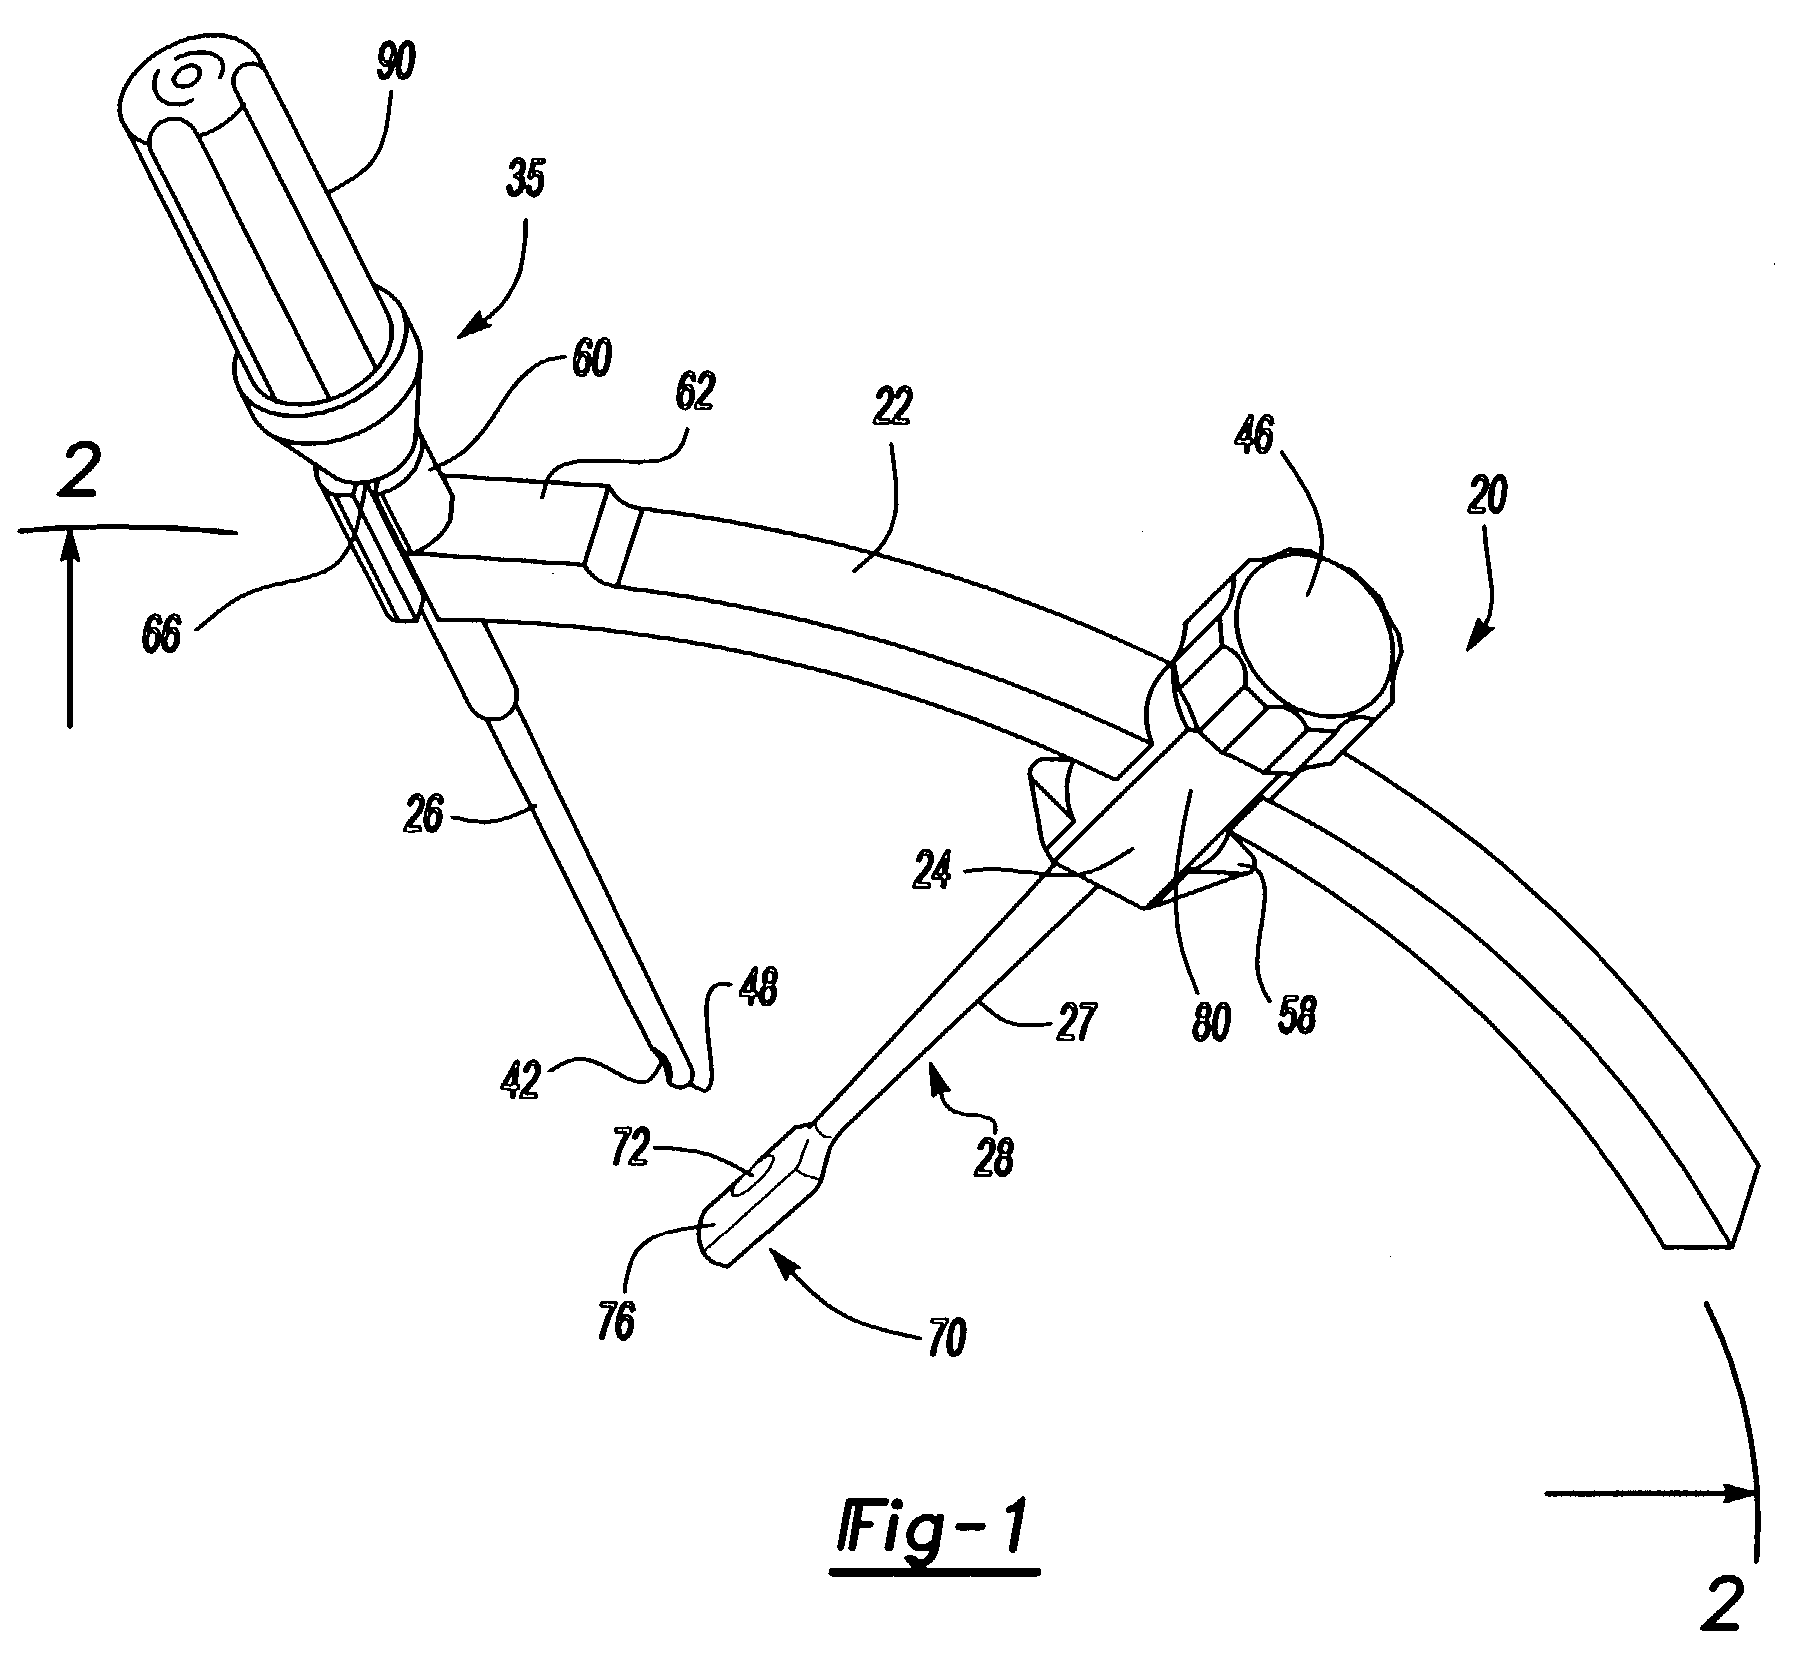 Device and method to assist in arthroscopic repair of detached connective tissue